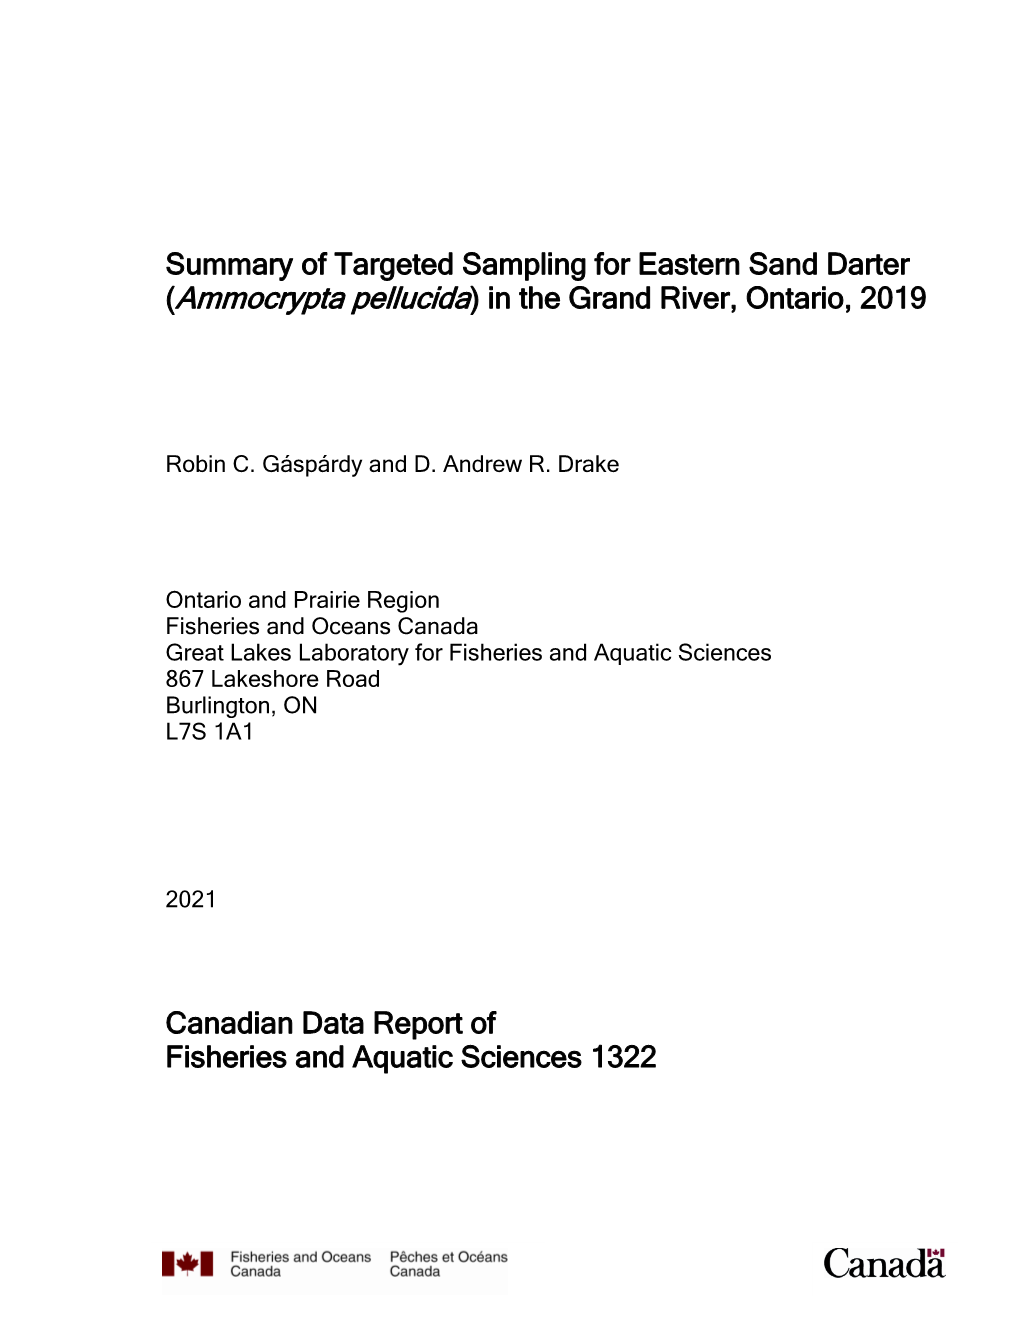 Summary of Targeted Sampling for Eastern Sand Darter (Ammocrypta Pellucida) in the Grand River, Ontario, 2019